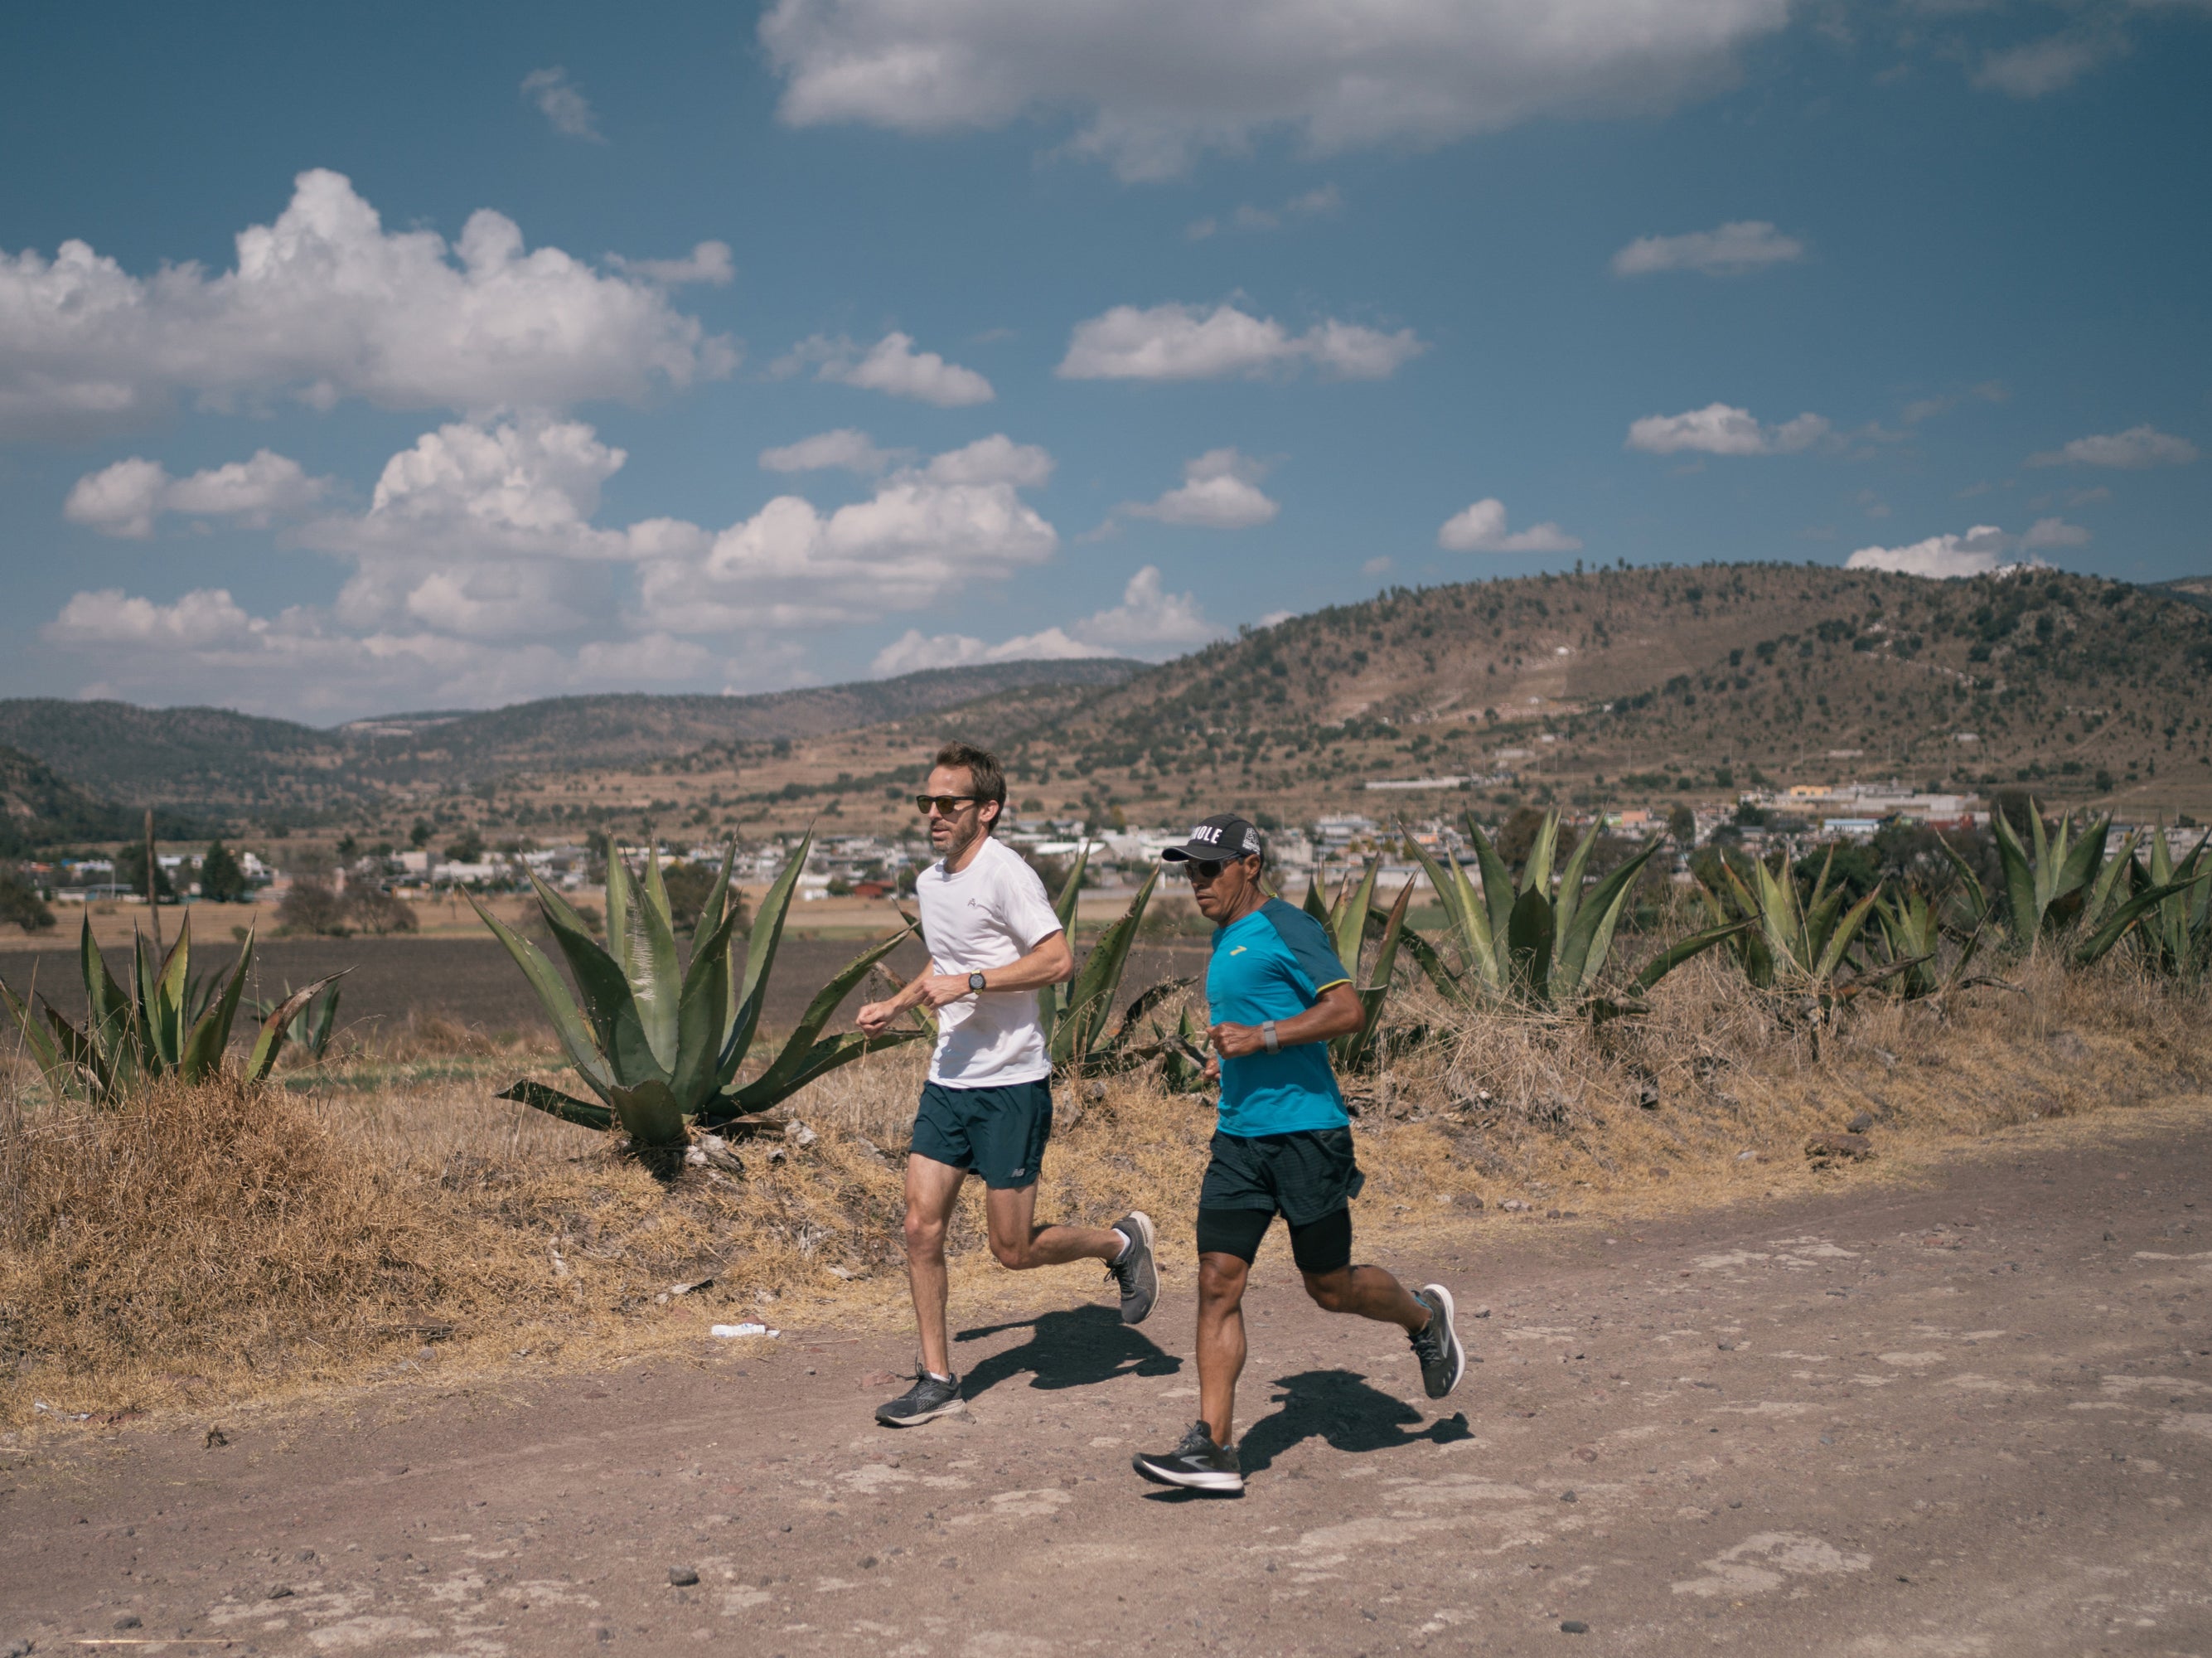 Kevin Sieff (left) and Germán Silva run along a dirt road in Tlaxcala